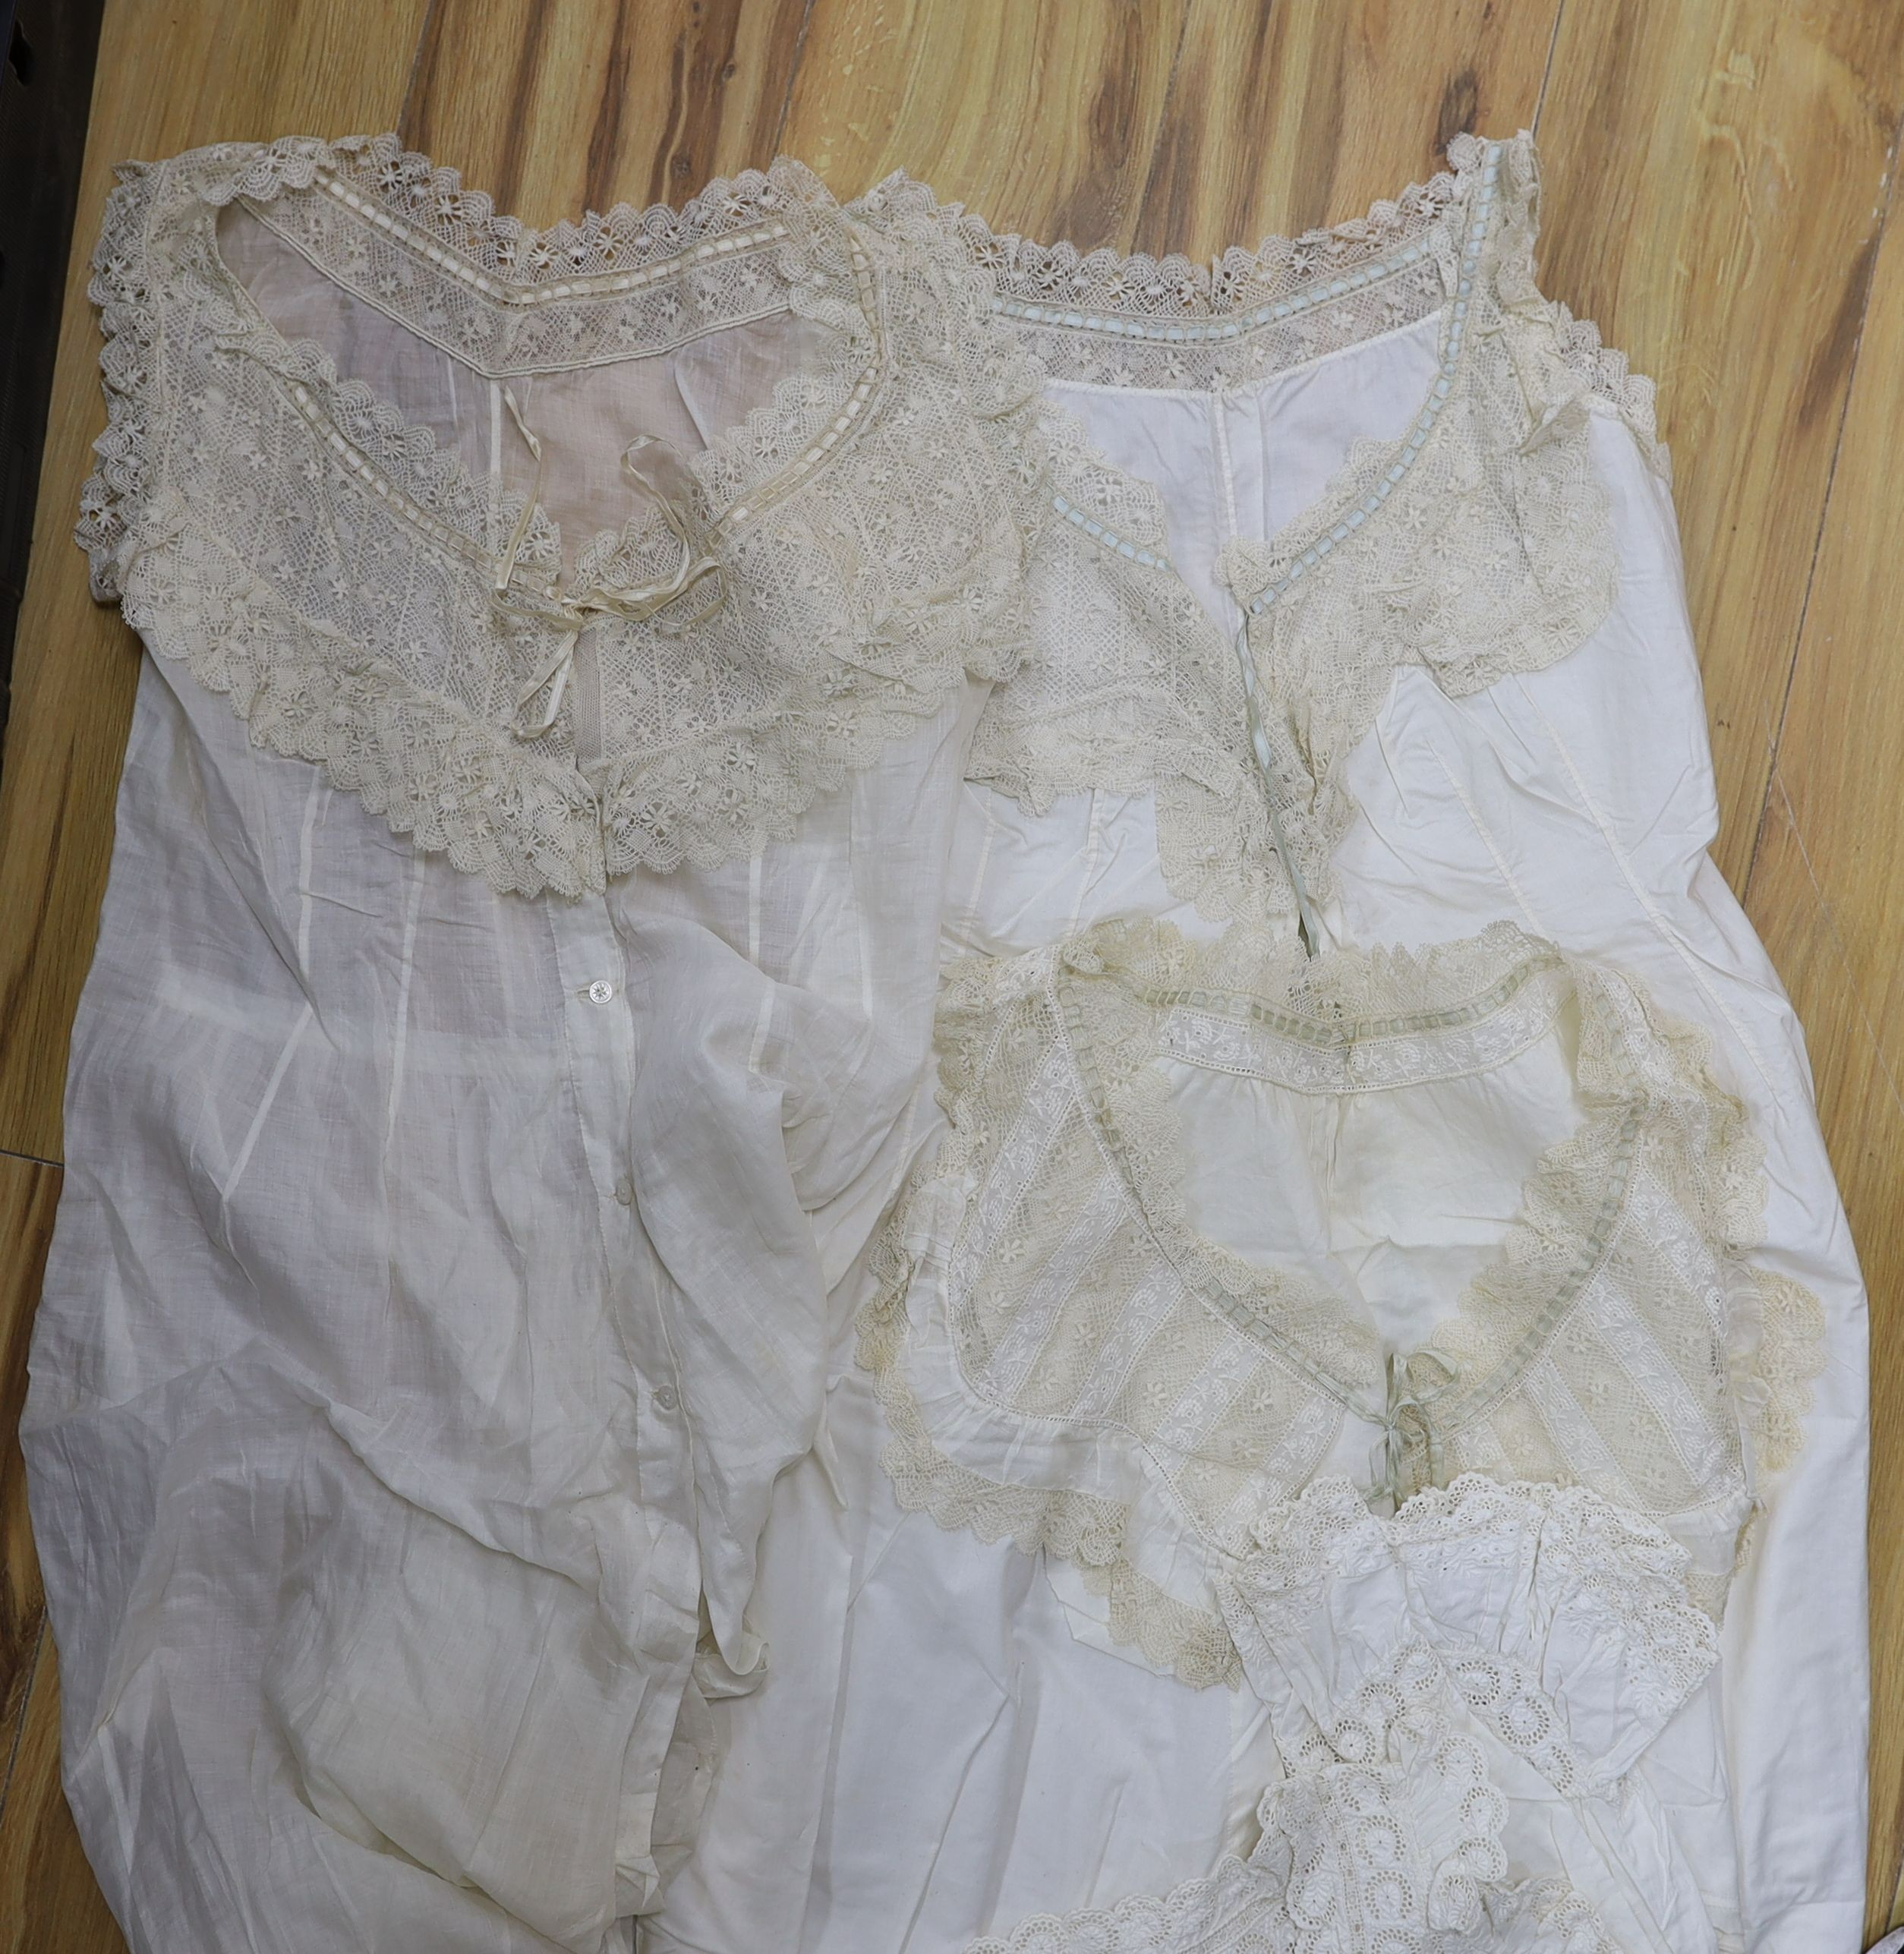 A collection of chemise/pantaloon lace inserted undergarments and a collection of petticoat flounces